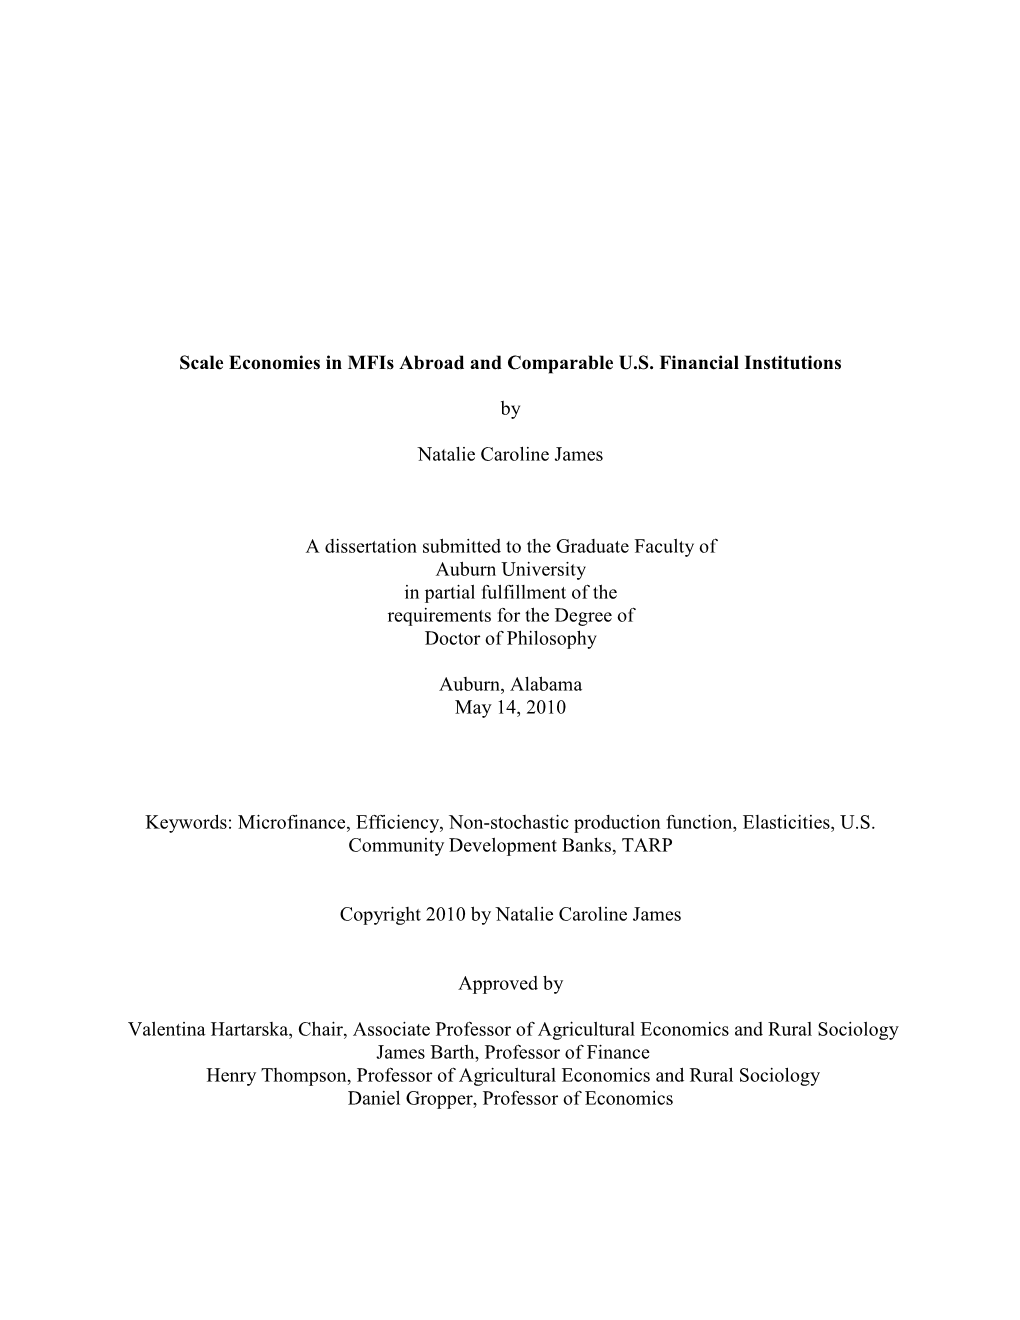 Scale Economies in Mfis Abroad and Comparable U.S